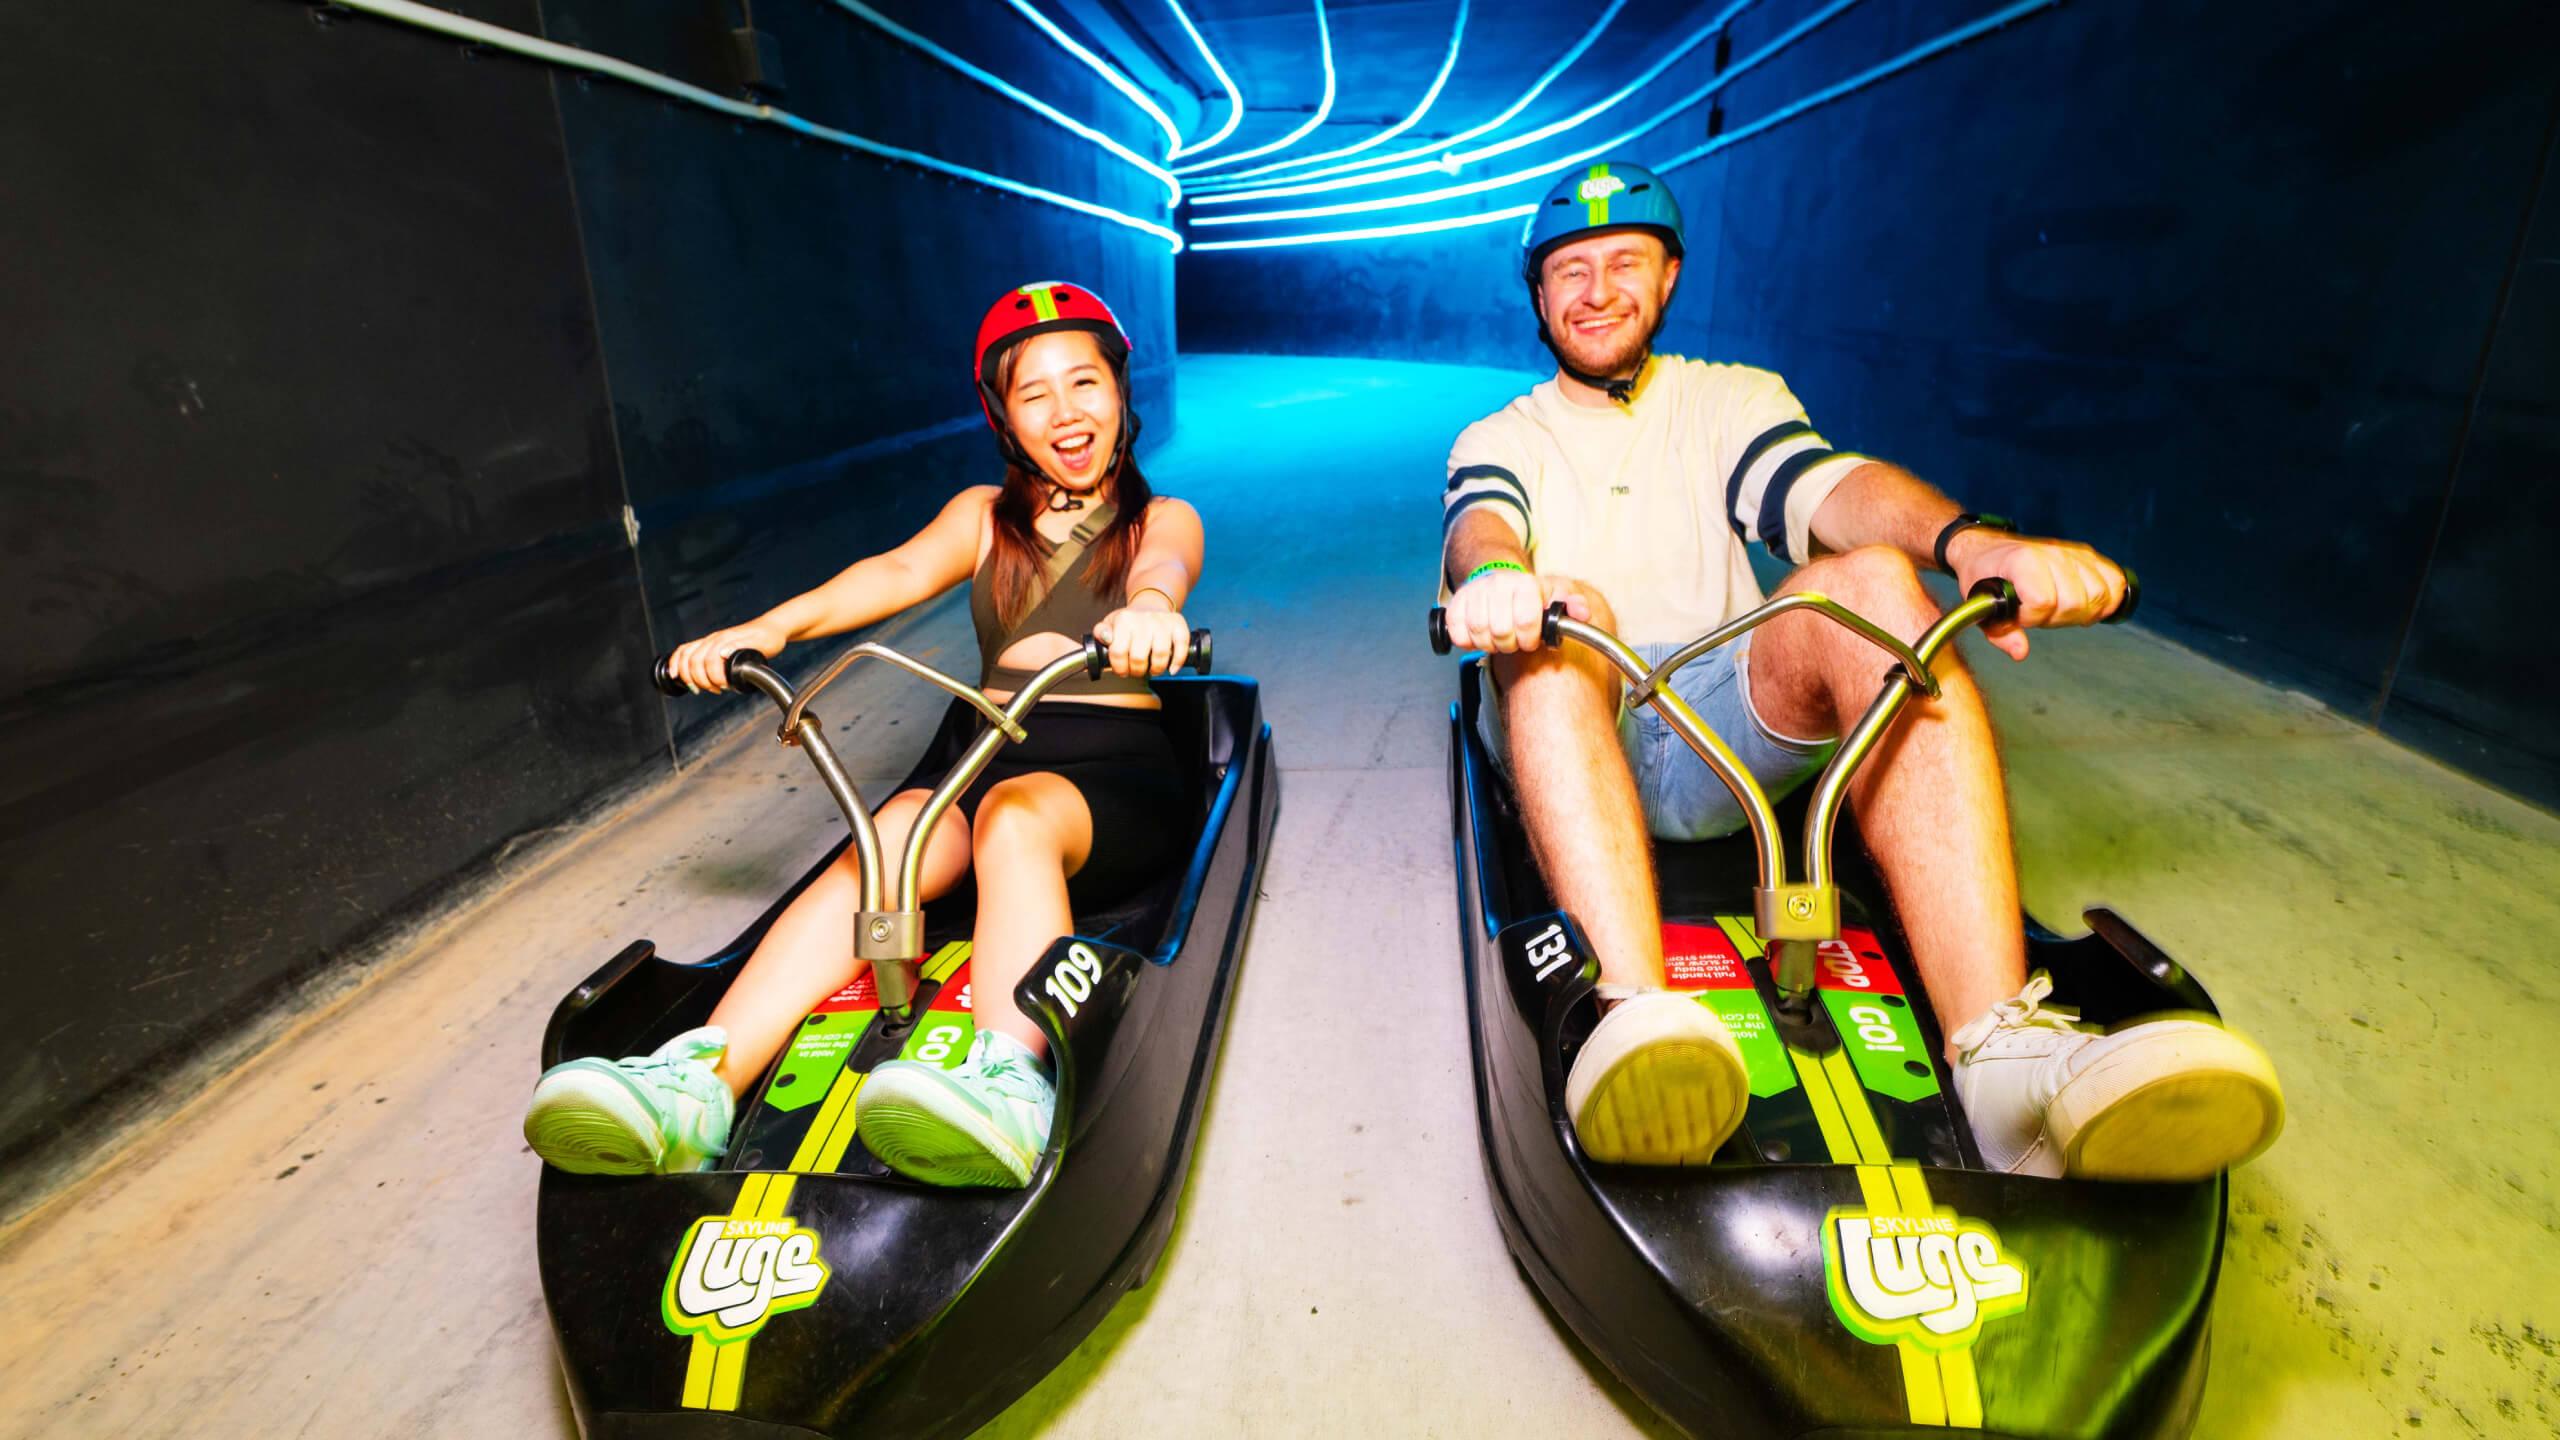 A young couple rides through a tunnel on the Night Luge together.